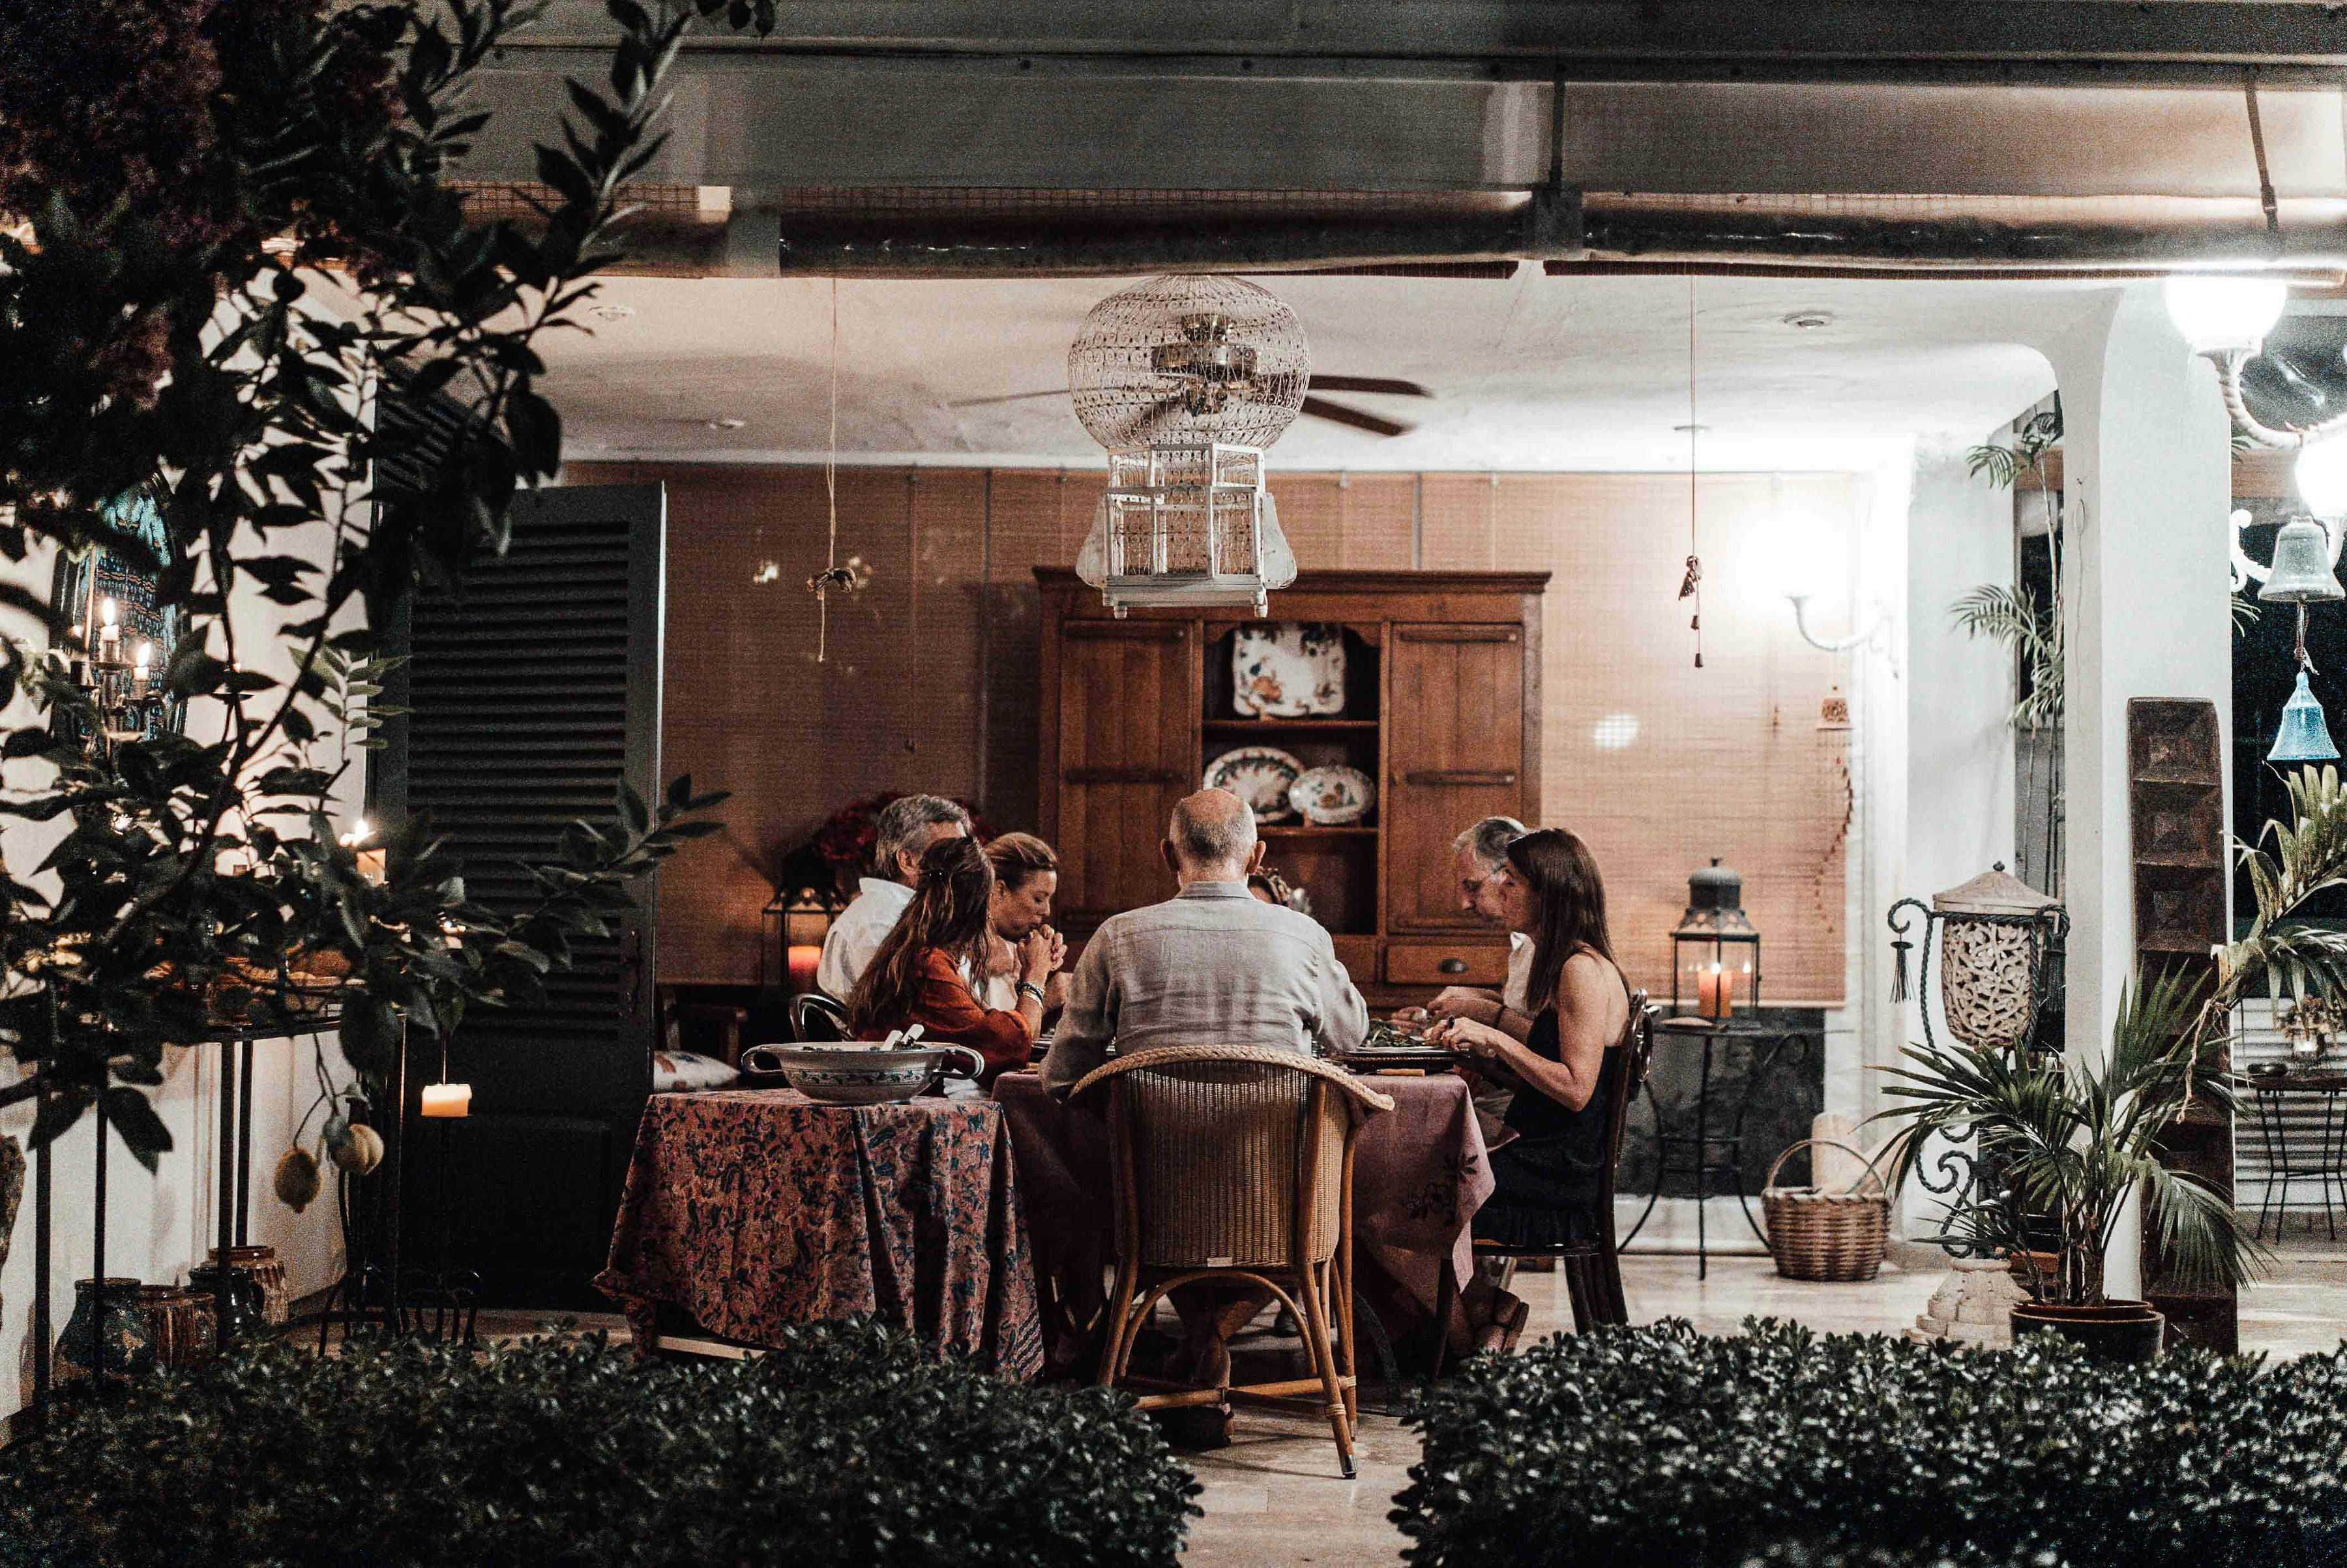 A family having dinner. For illustration purposes only | Source: Pexels